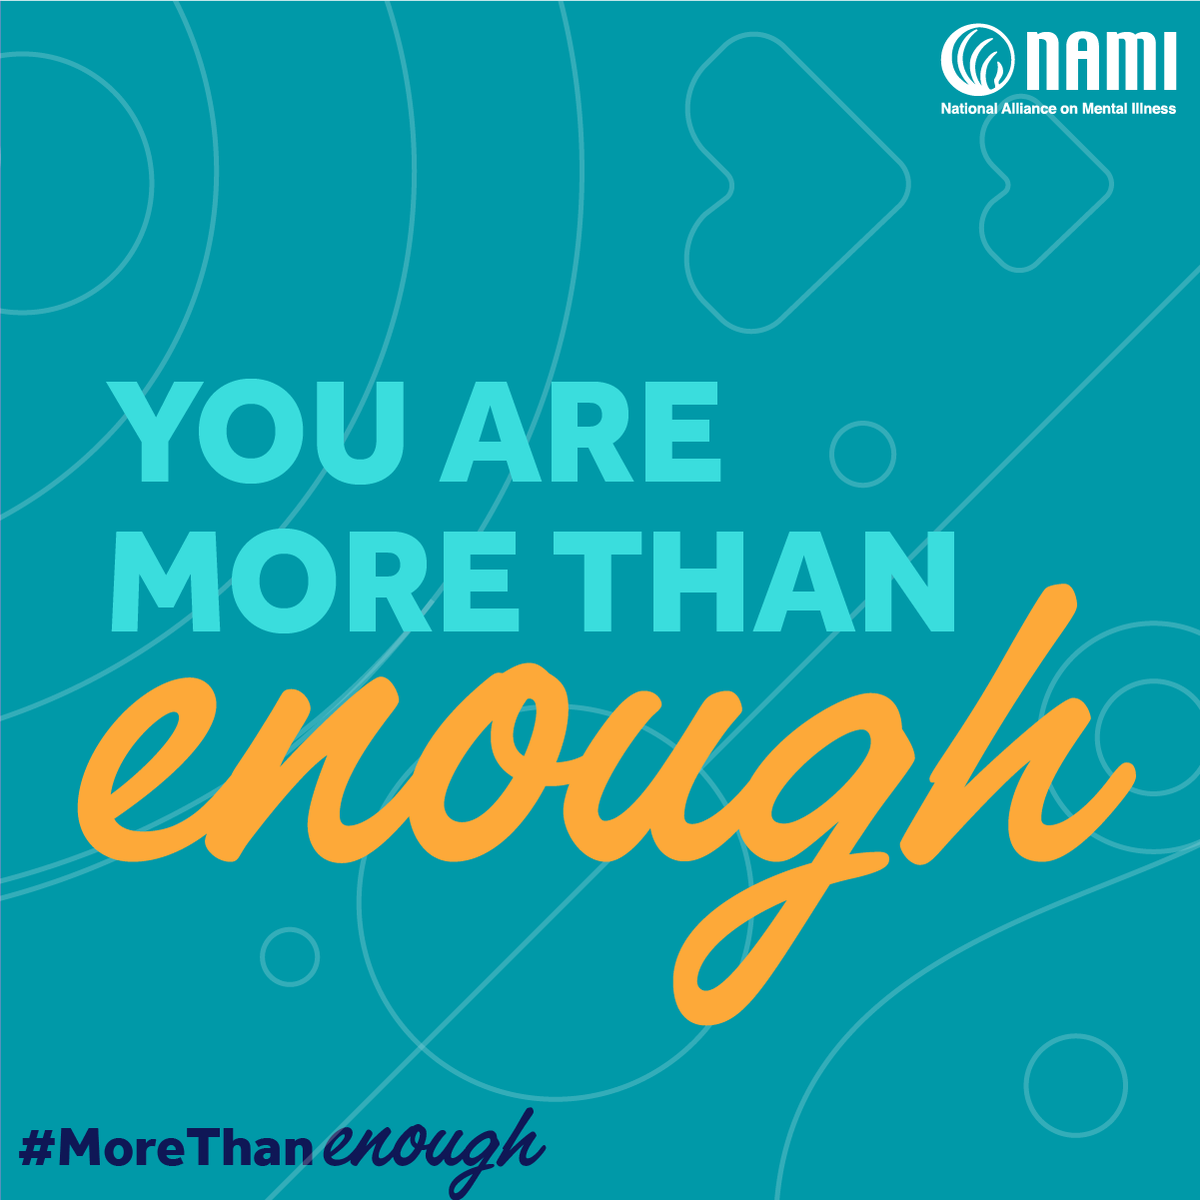 May is Mental Health Awareness Month! “We want every person out there to know that if all you did was wake up today, that’s more than enough. No matter what, you are inherently worthy of more than enough life, love and healing.” Learn more: hubs.la/Q02vf1RD0 #MoreThanEnough